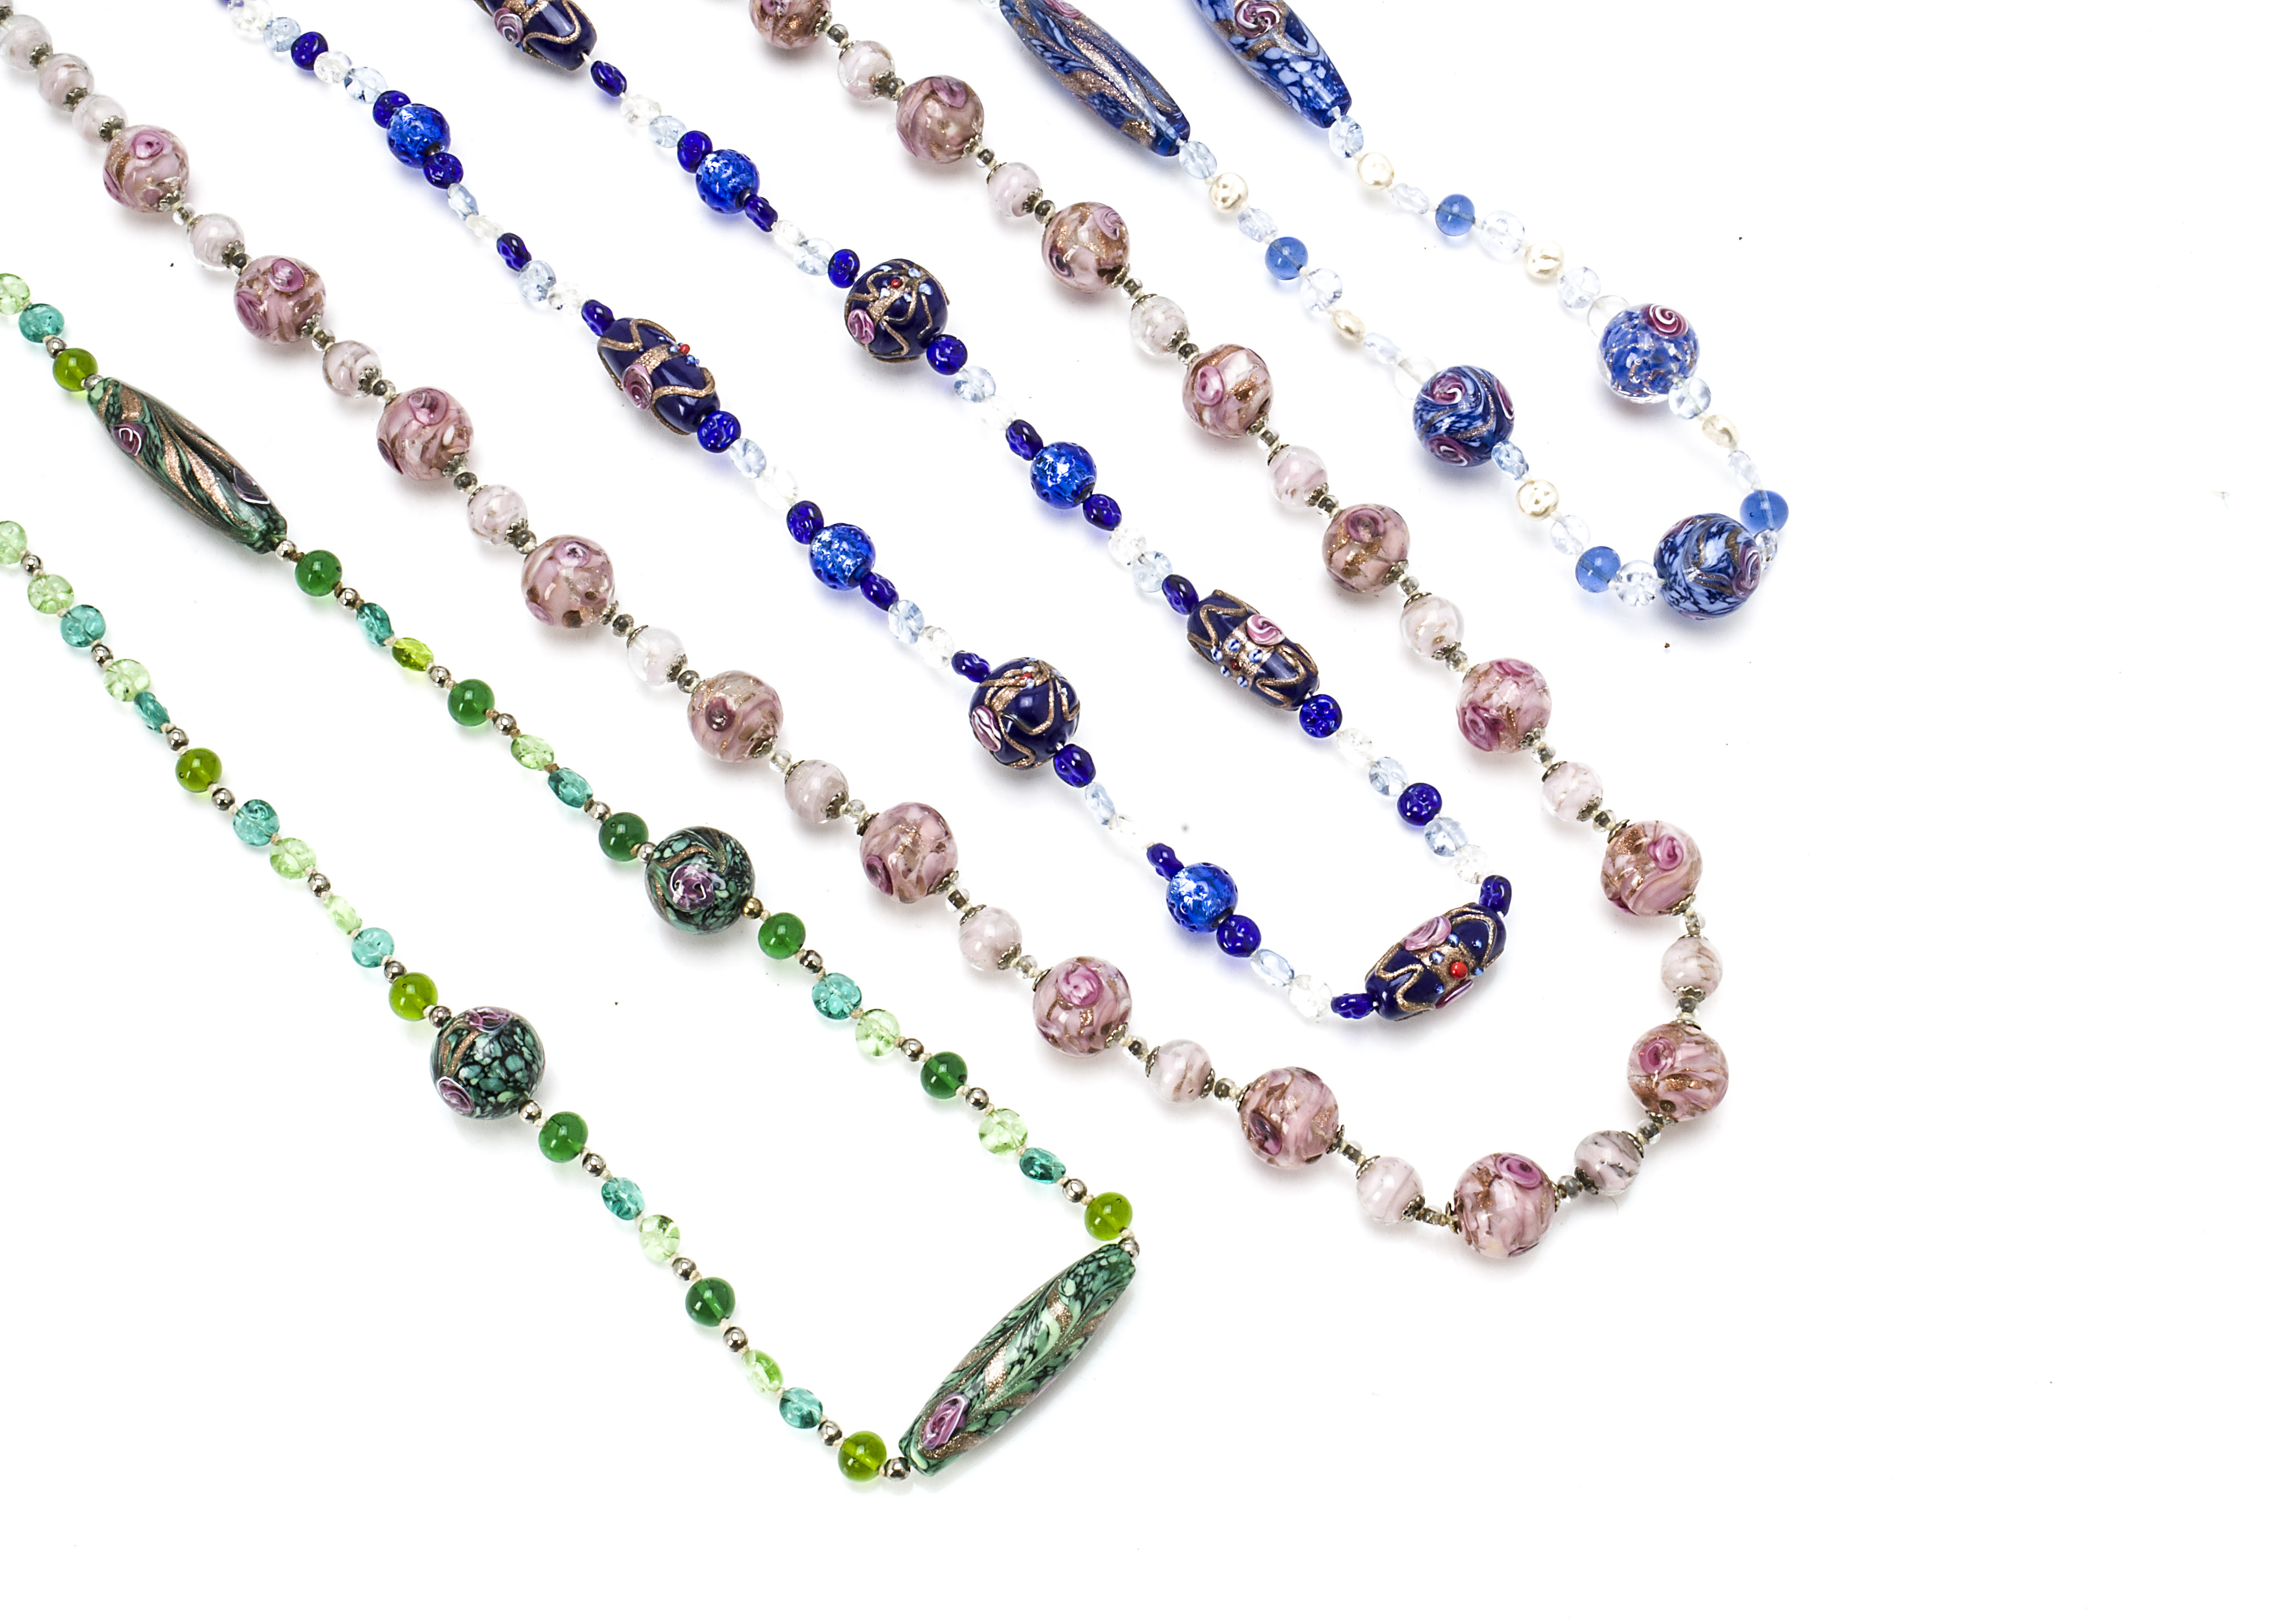 A collection of Italian Murano glass beads, in blues, greens and pinks, all having gilt aventurine